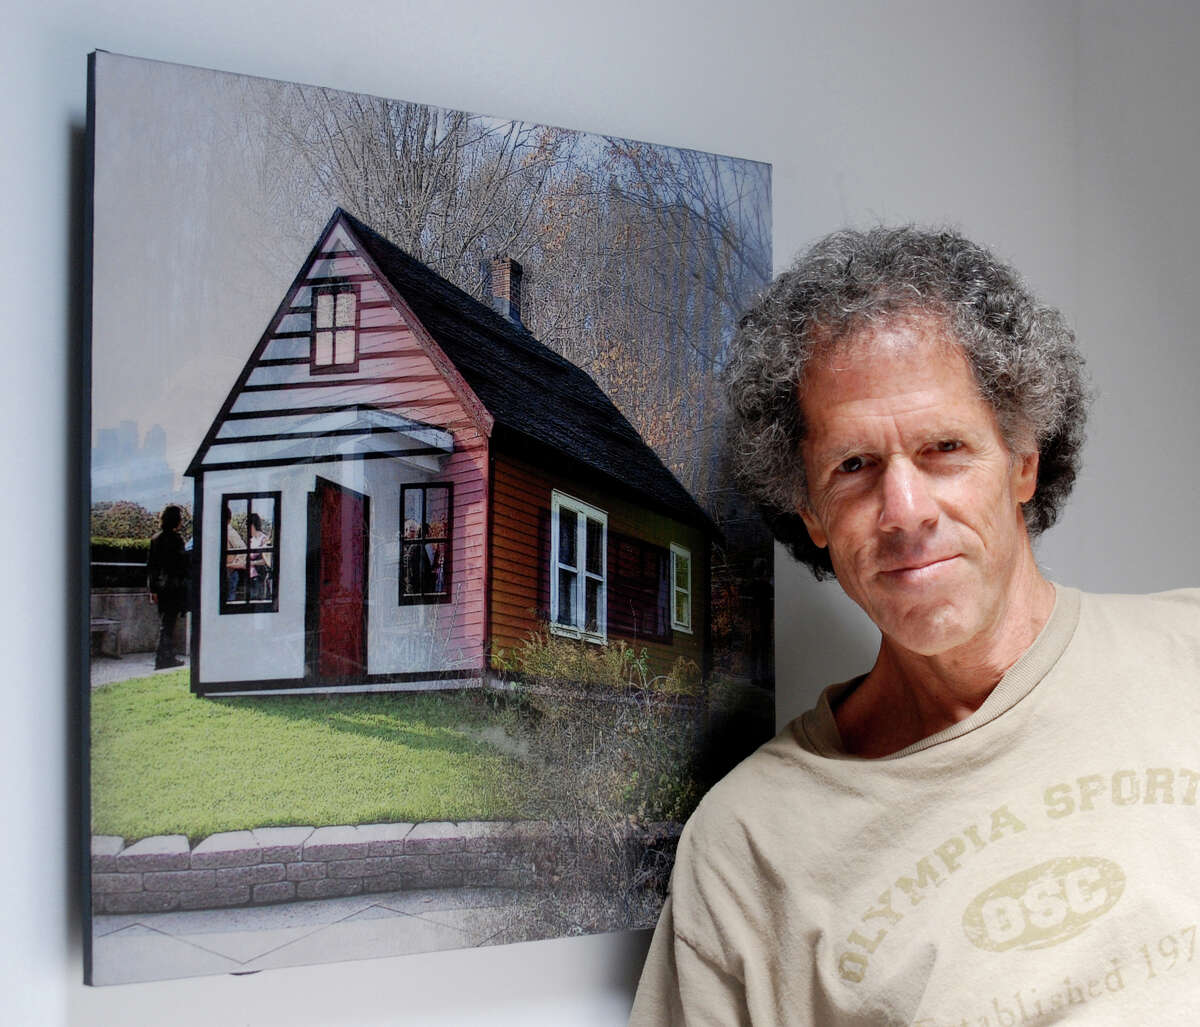 Miggs Burroughs's lenticular photography will be on exhibit at the Fairfield Museum from Thursday, Dec. 19, through Feb. 18. The process combines two images that, in person, fade into one another as a viewer walks by. Above is "House" that combines a Roy Lichtenstein painting with a Fairfield red shack.